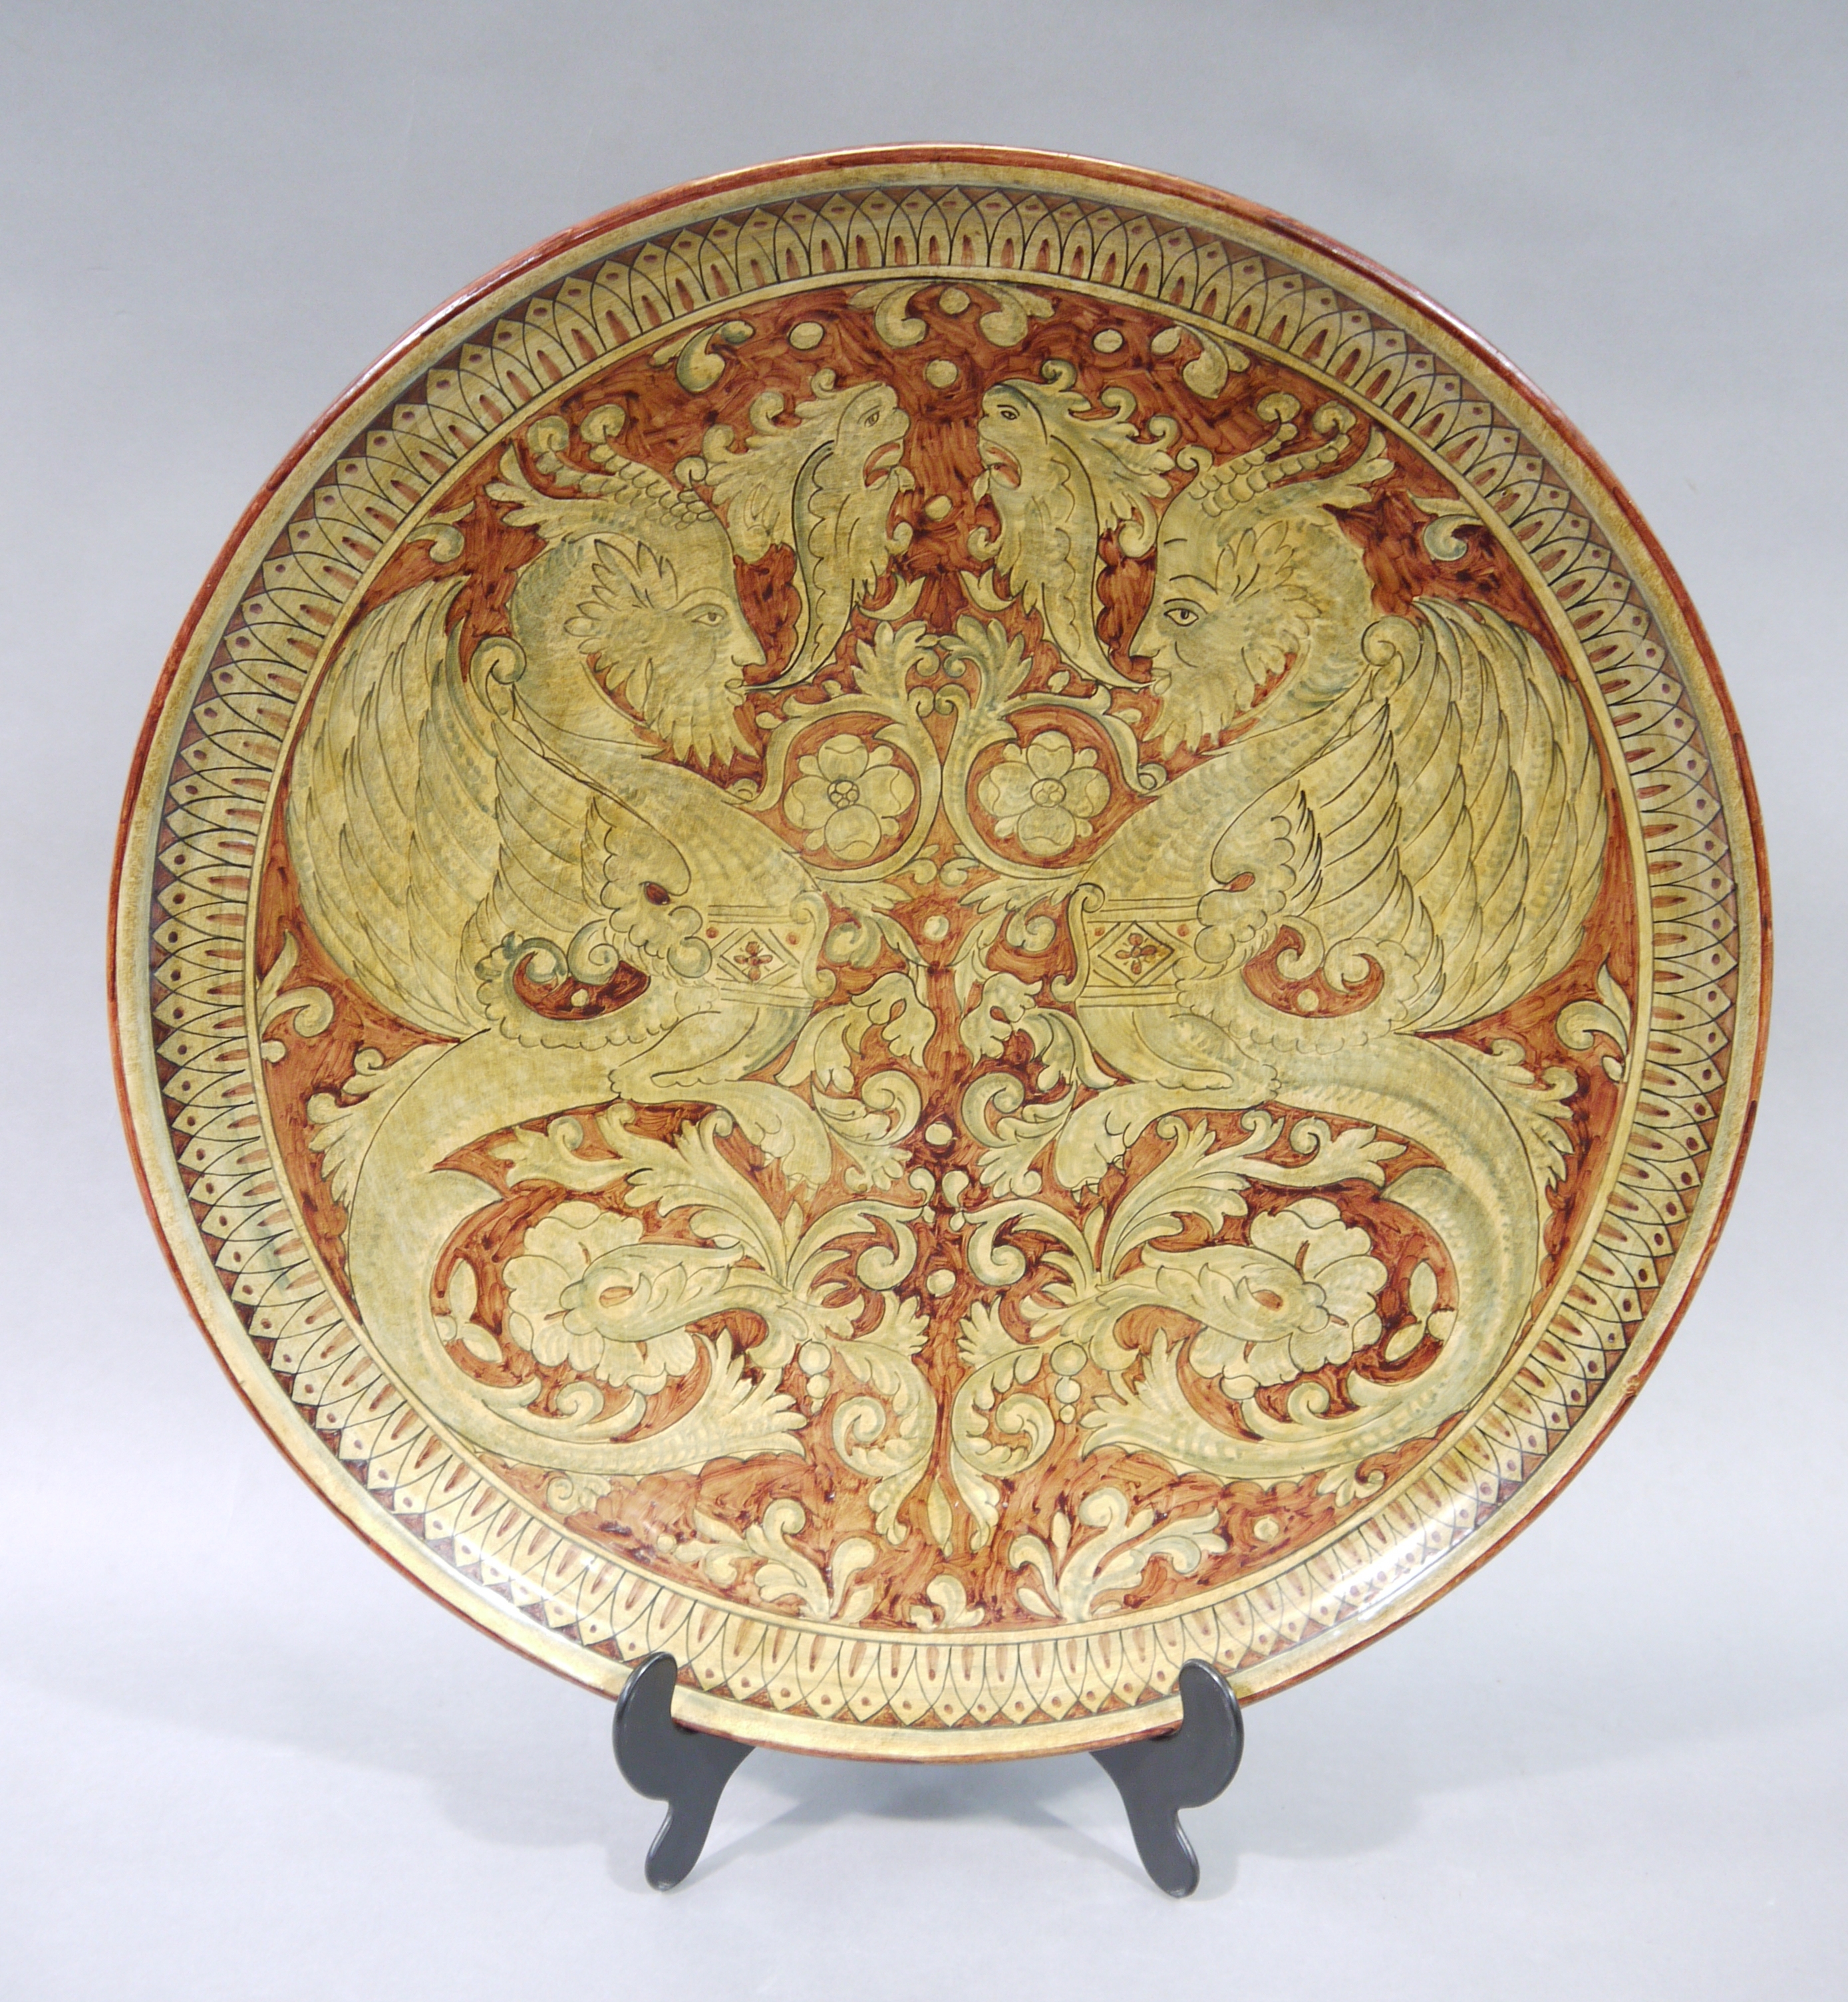 A large Italian pottery circular charger painted with a pair of mythical beast and stylised sea